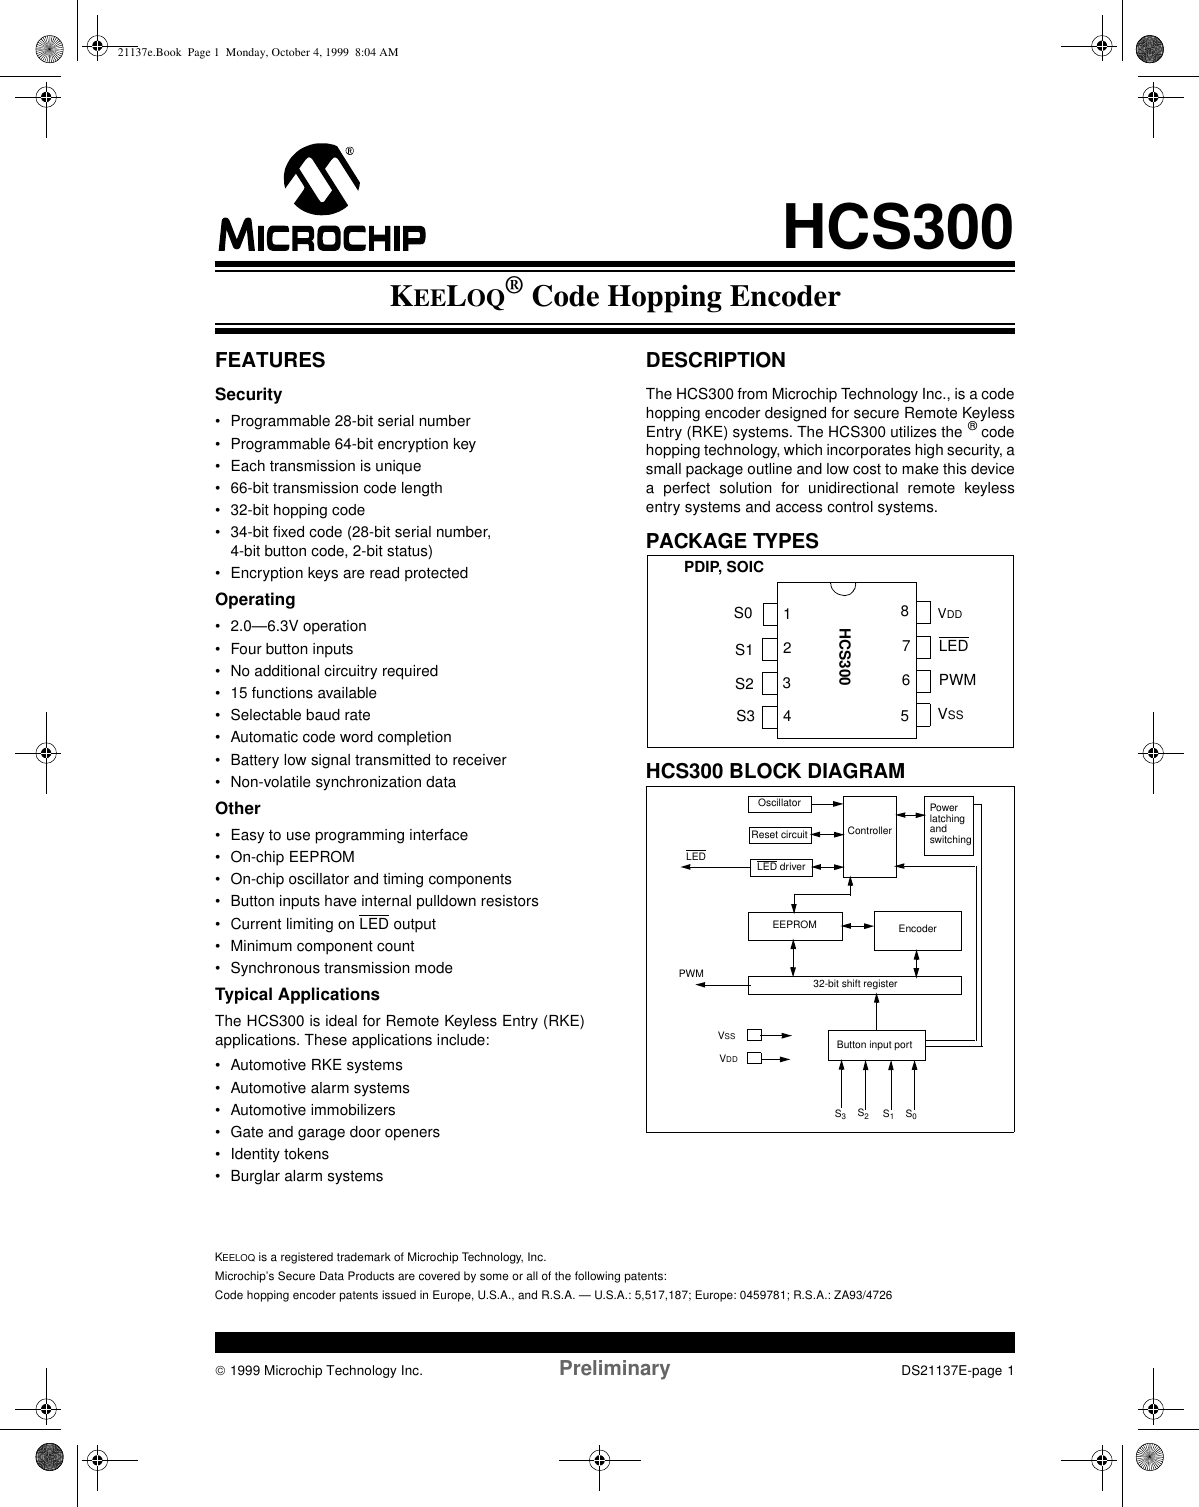  1999 Microchip Technology Inc. Preliminary DS21137E-page 1FEATURESSecurity• Programmable 28-bit serial number• Programmable 64-bit encryption key• Each transmission is unique• 66-bit transmission code length• 32-bit hopping code• 34-bit fixed code (28-bit serial number, 4-bit button code, 2-bit status)• Encryption keys are read protectedOperating• 2.0—6.3V operation• Four button inputs• No additional circuitry required• 15 functions available • Selectable baud rate• Automatic code word completion• Battery low signal transmitted to receiver• Non-volatile synchronization dataOther• Easy to use programming interface• On-chip EEPROM• On-chip oscillator and timing components• Button inputs have internal pulldown resistors• Current limiting on LED output• Minimum component count• Synchronous transmission modeTypical ApplicationsThe HCS300 is ideal for Remote Keyless Entry (RKE)applications. These applications include:• Automotive RKE systems• Automotive alarm systems• Automotive immobilizers• Gate and garage door openers • Identity tokens• Burglar alarm systemsDESCRIPTIONThe HCS300 from Microchip Technology Inc., is a codehopping encoder designed for secure Remote KeylessEntry (RKE) systems. The HCS300 utilizes the ® codehopping technology, which incorporates high security, asmall package outline and low cost to make this devicea perfect solution for unidirectional remote keylessentry systems and access control systems.PACKAGE TYPESHCS300 BLOCK DIAGRAM12348765S0S1S2S3VDDLEDPWMVSSPDIP, SOICHCS300VSSVDDOscillatorReset circuitLED driverControllerPowerlatchingandswitchingButton input port32-bit shift registerEncoderEEPROMPWM   LED   S3S2S1S0KEELOQ® Code Hopping EncoderHCS300KEELOQ is a registered trademark of Microchip Technology, Inc.Microchip’s Secure Data Products are covered by some or all of the following patents:Code hopping encoder patents issued in Europe, U.S.A., and R.S.A. — U.S.A.: 5,517,187; Europe: 0459781; R.S.A.: ZA93/472621137e.Book  Page 1  Monday, October 4, 1999  8:04 AM